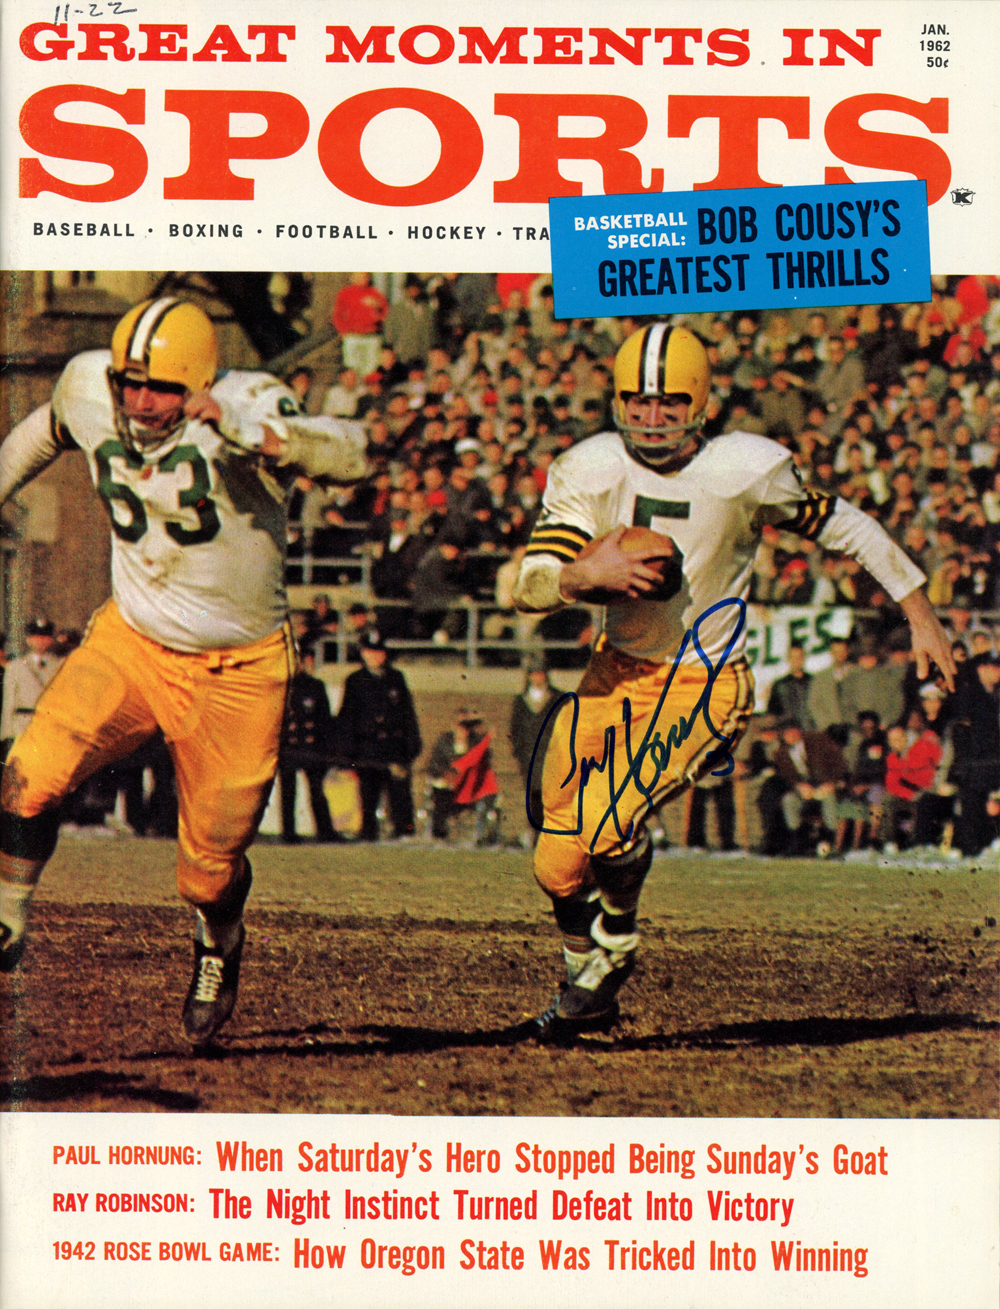 Paul Hornung Autographed/Signed 1962 Great Moments Magazine Beckett